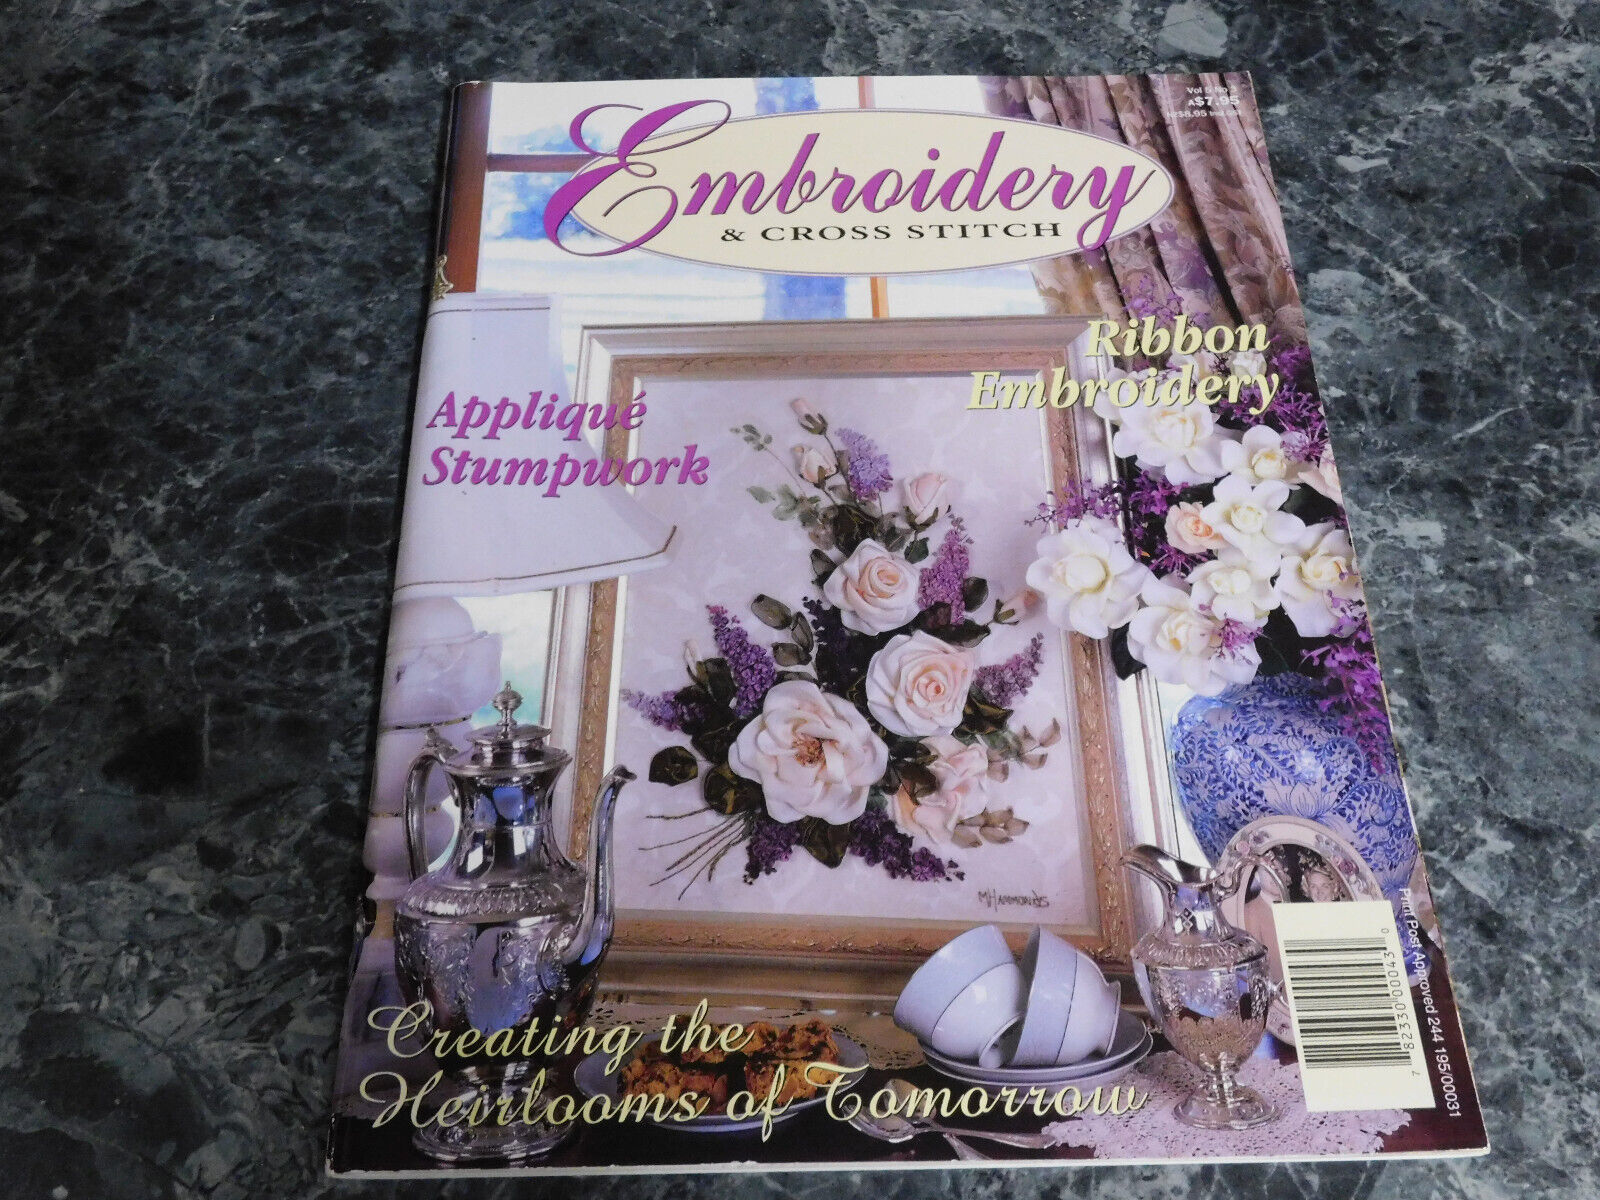 Embroidery and Cross Stitch Vol 5 No 3 by Karen Winflield - $5.99